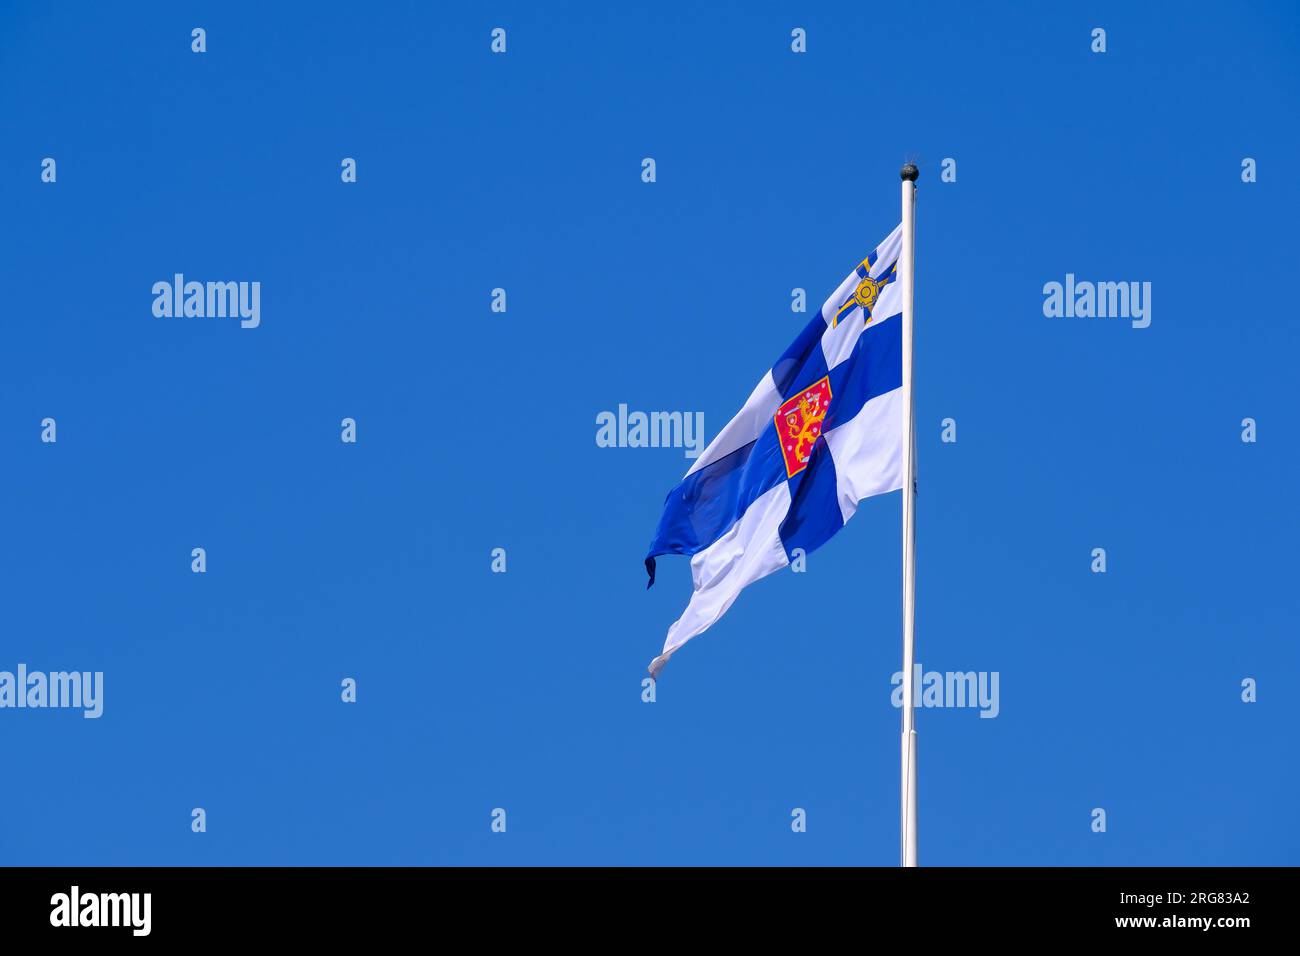 Helsinki / Finland - JUNE 27, 2023: Finnish state flag waiving in the wind against a bright blue sky. Stock Photo